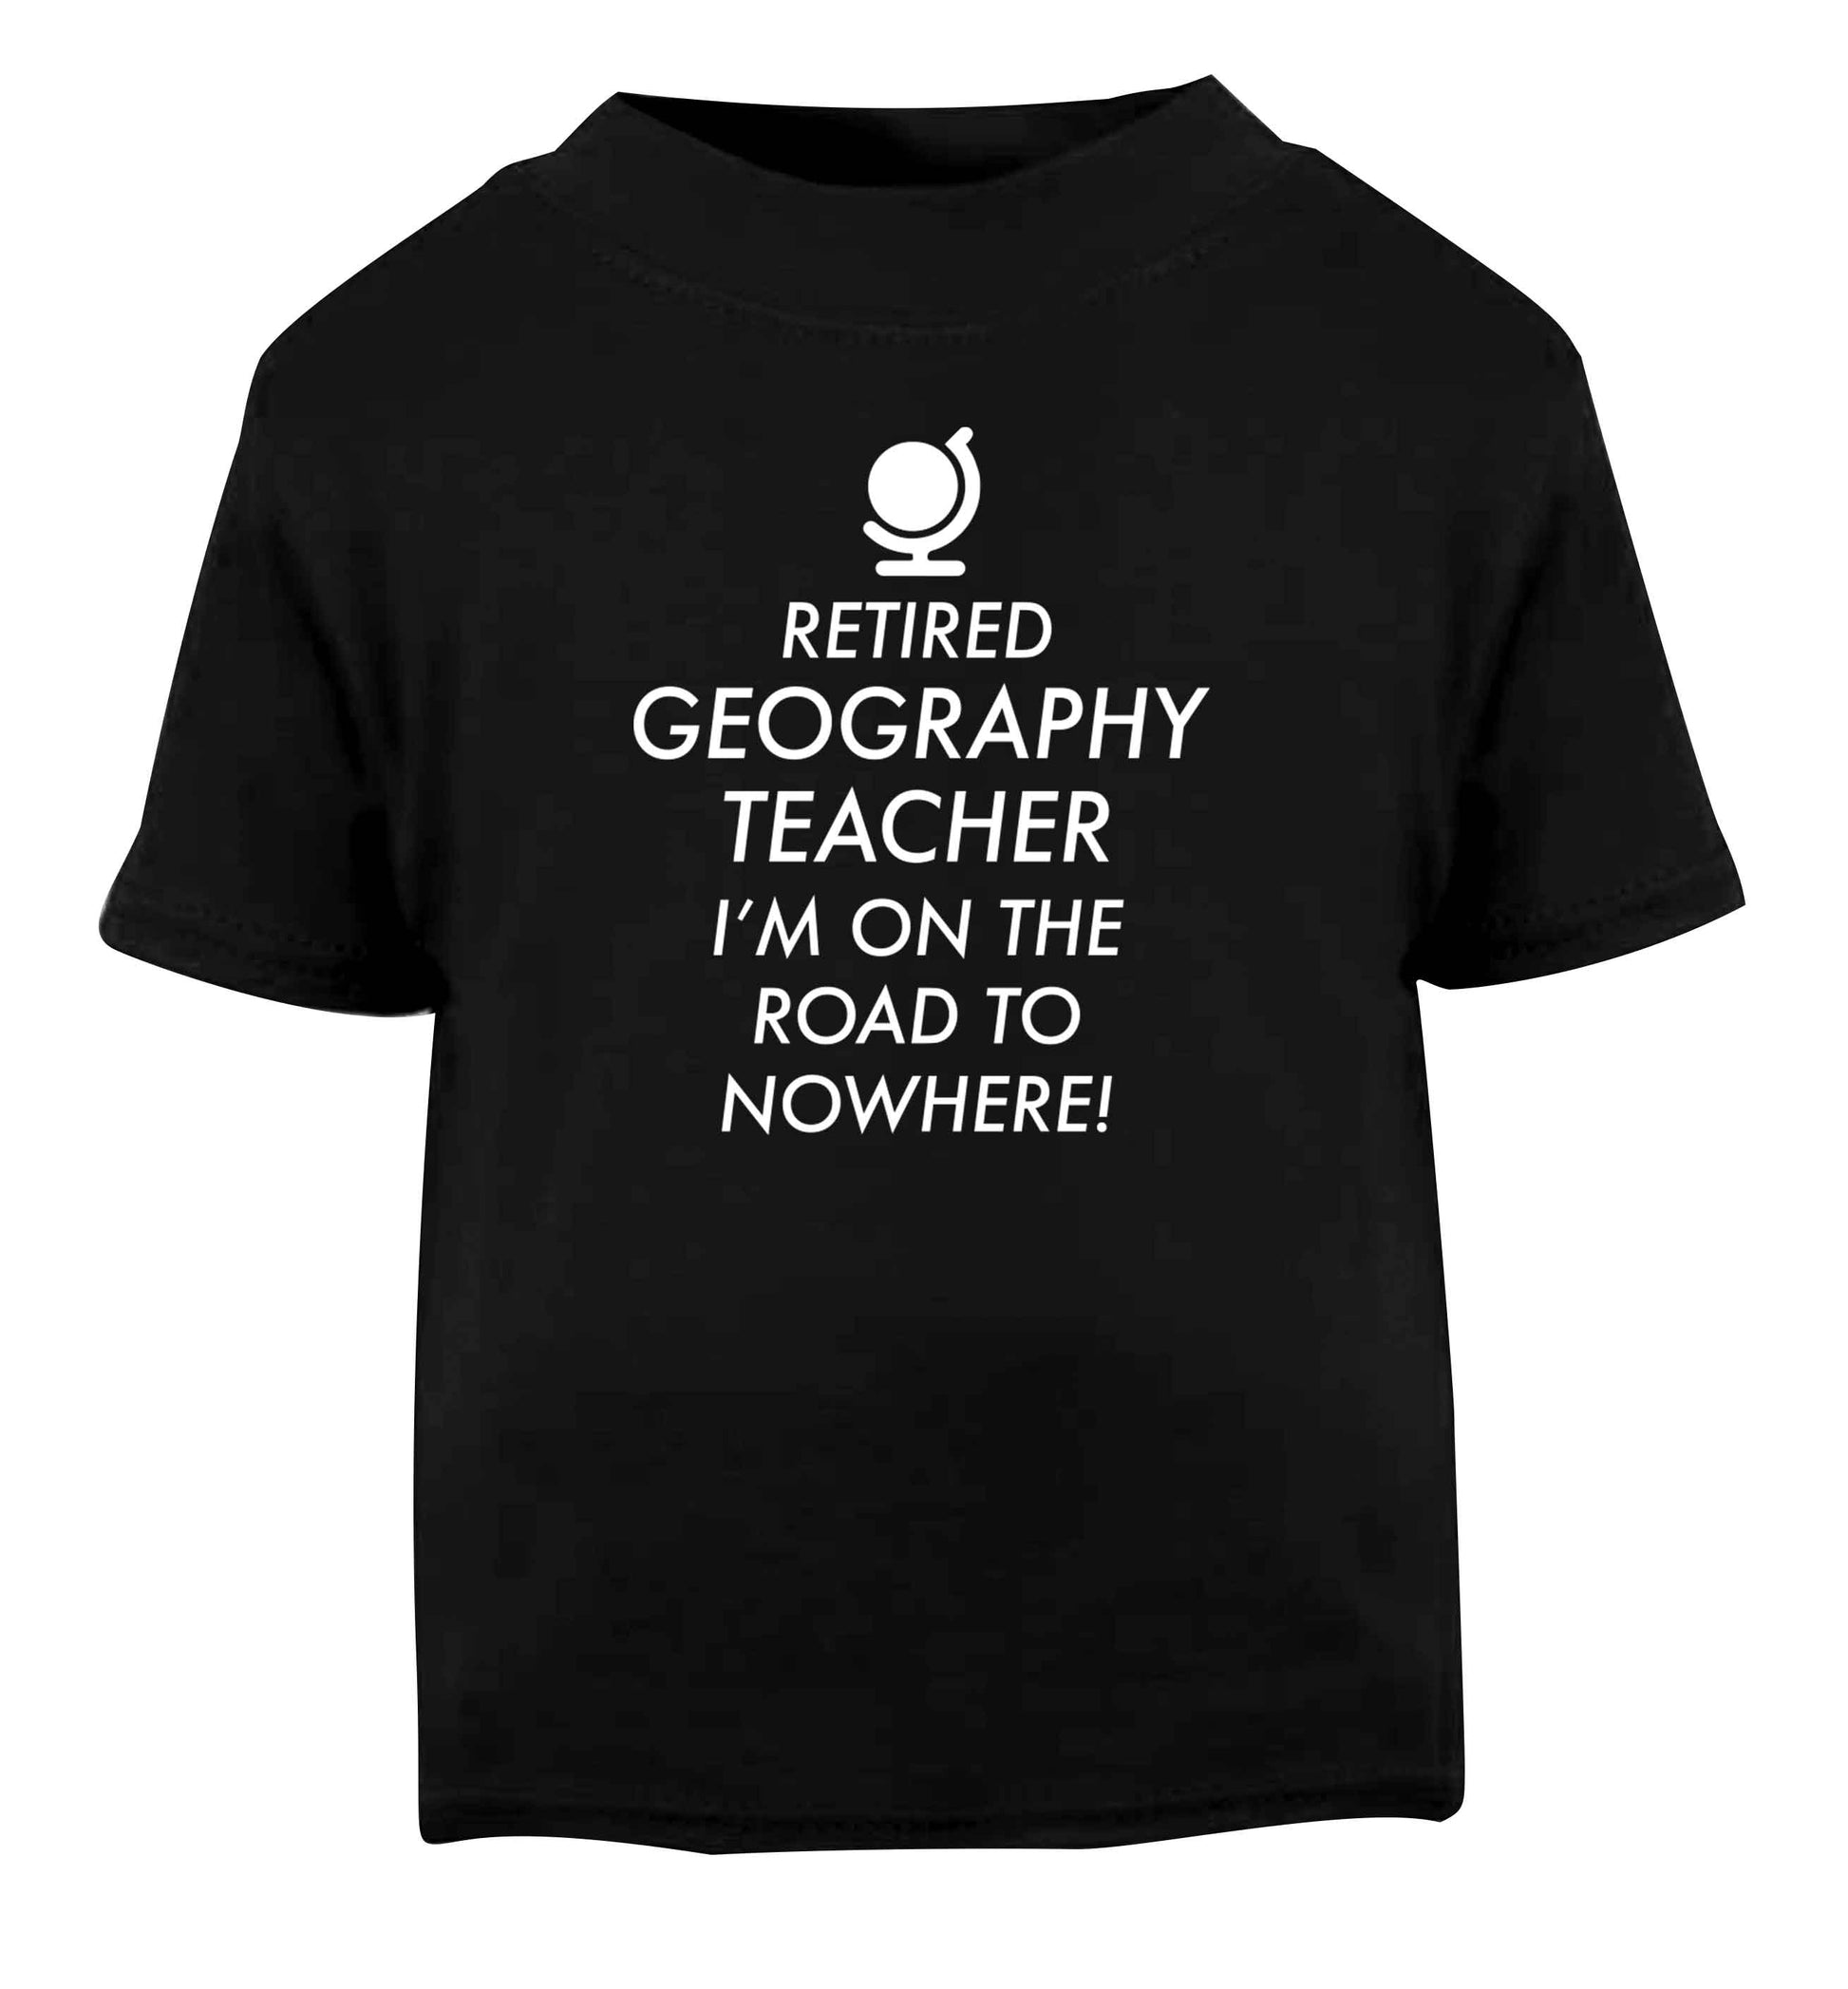 Retired geography teacher I'm on the road to nowhere Black Baby Toddler Tshirt 2 years